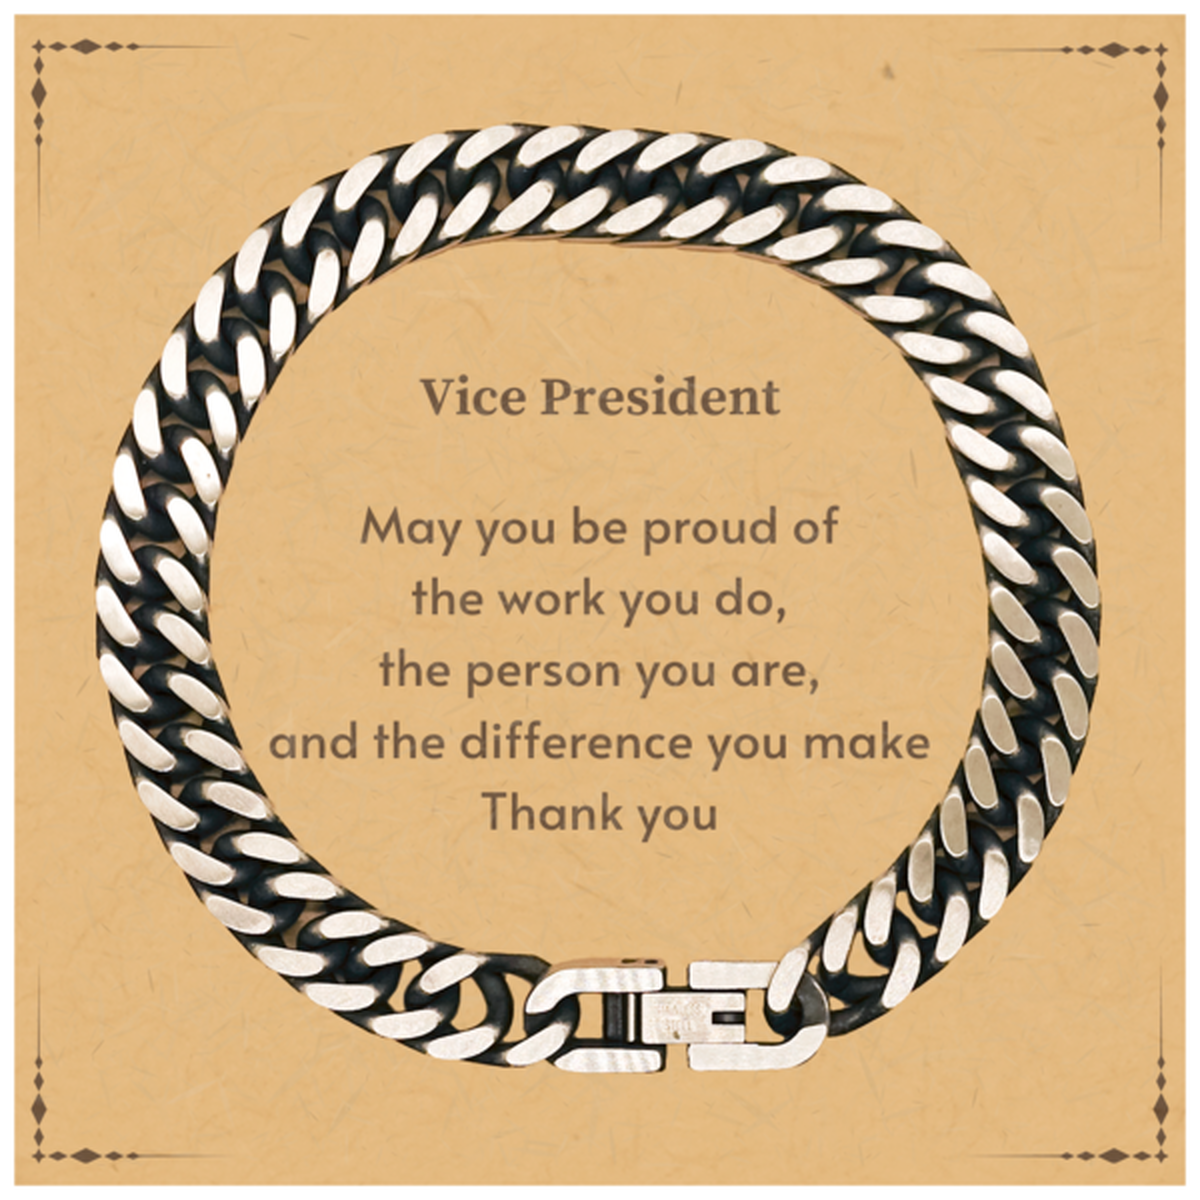 Heartwarming Cuban Link Chain Bracelet Retirement Coworkers Gifts for Vice President, Vice President May You be proud of the work you do, the person you are Gifts for Boss Men Women Friends